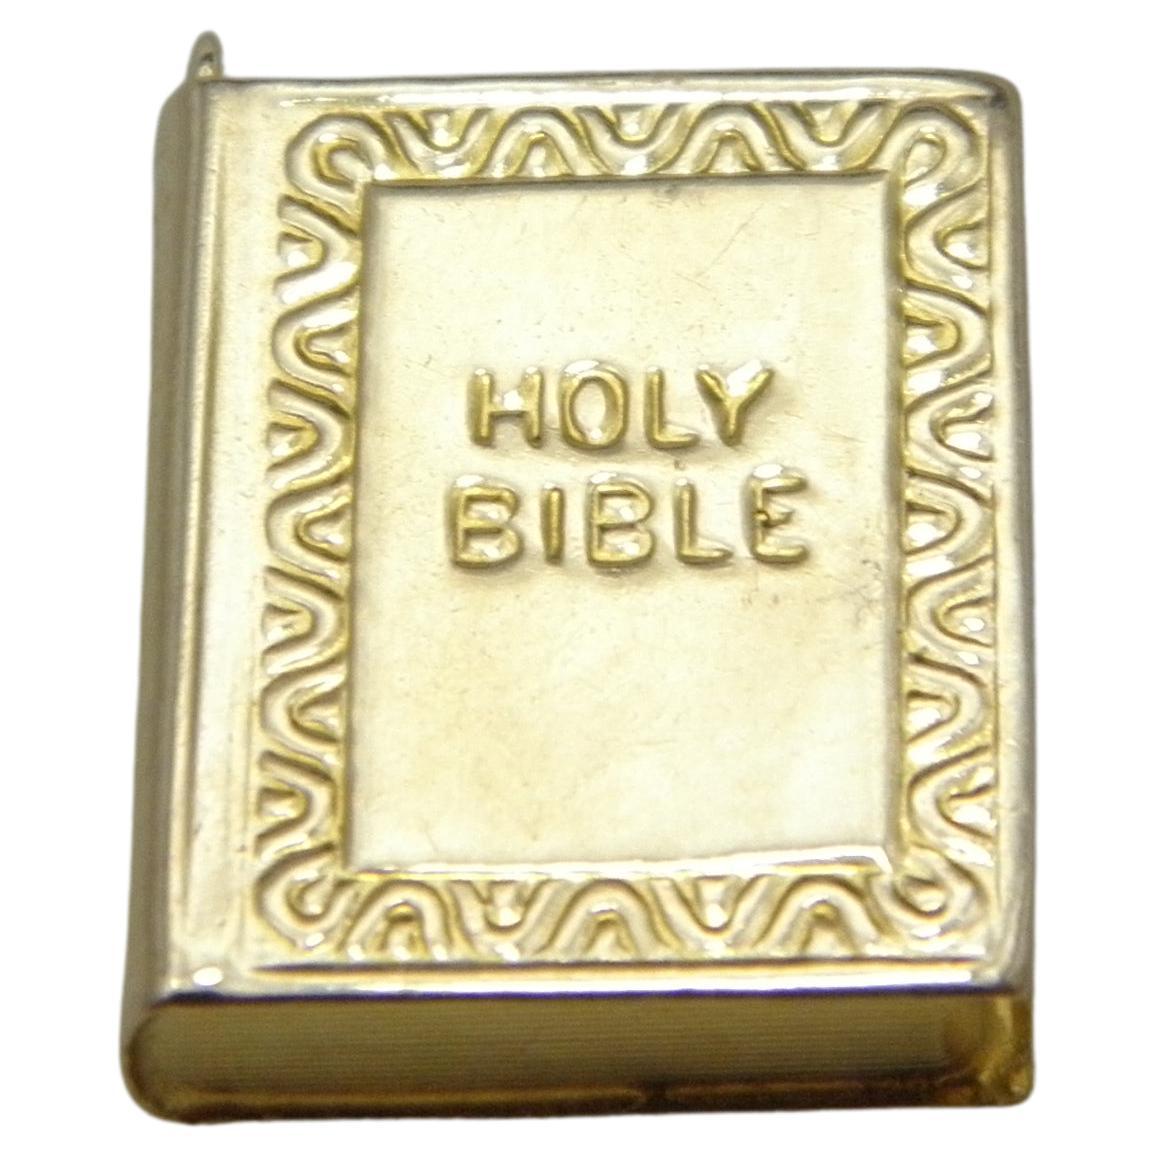 Vintage 9ct Gold Holy Bible Pendant Charm Fob c1962 375 Purity 